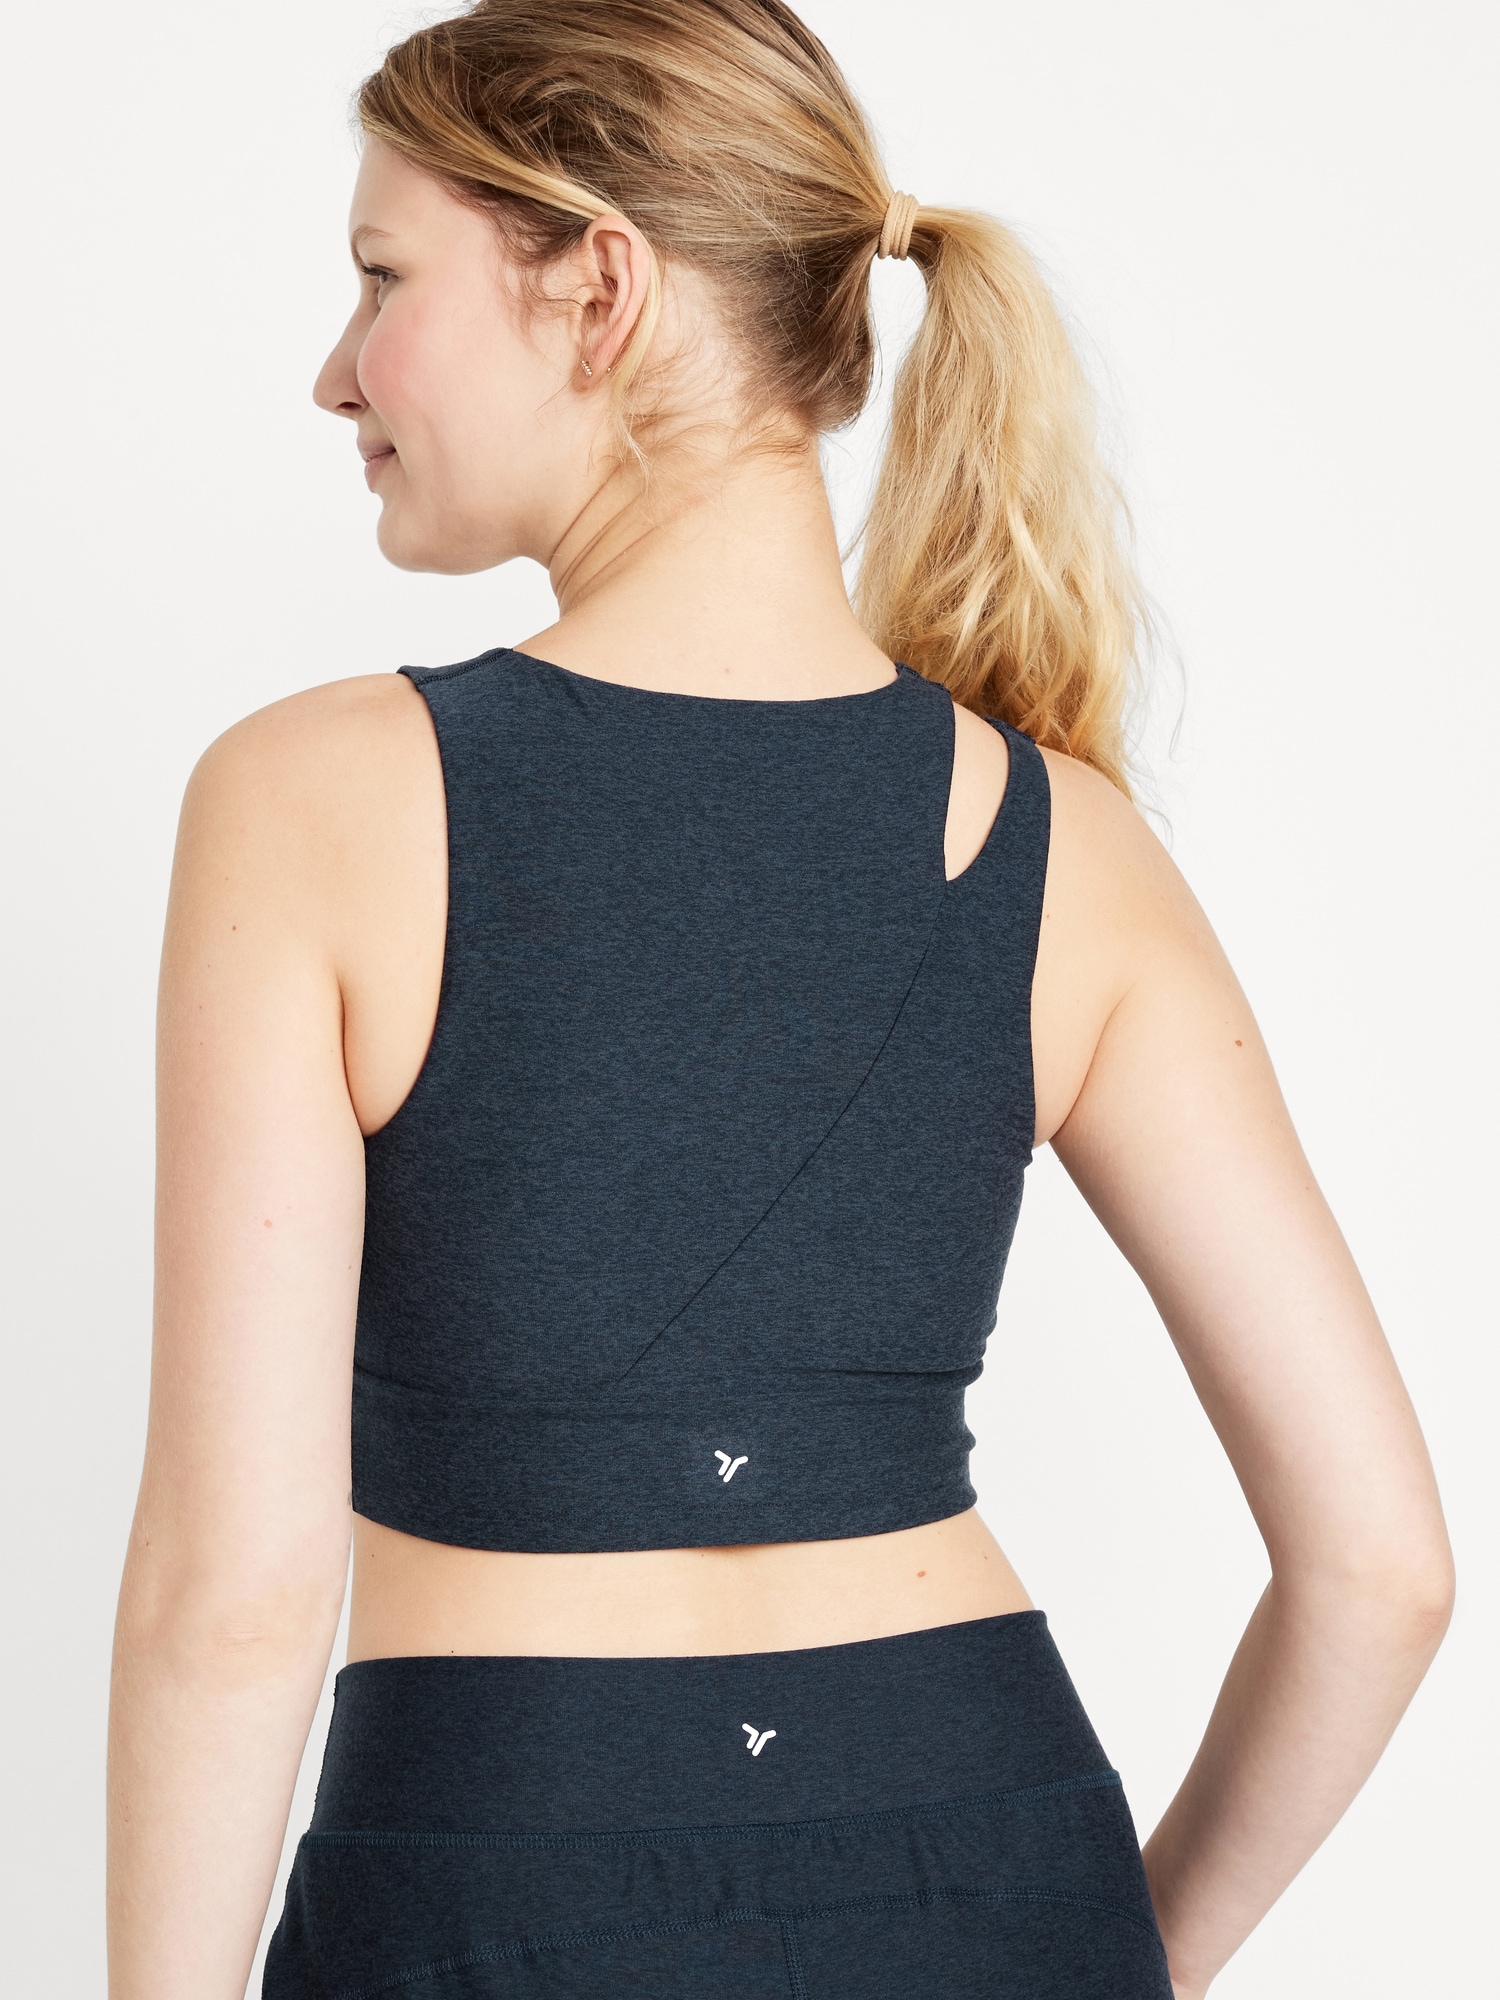 Orion Sports bra – The Cool Ppl